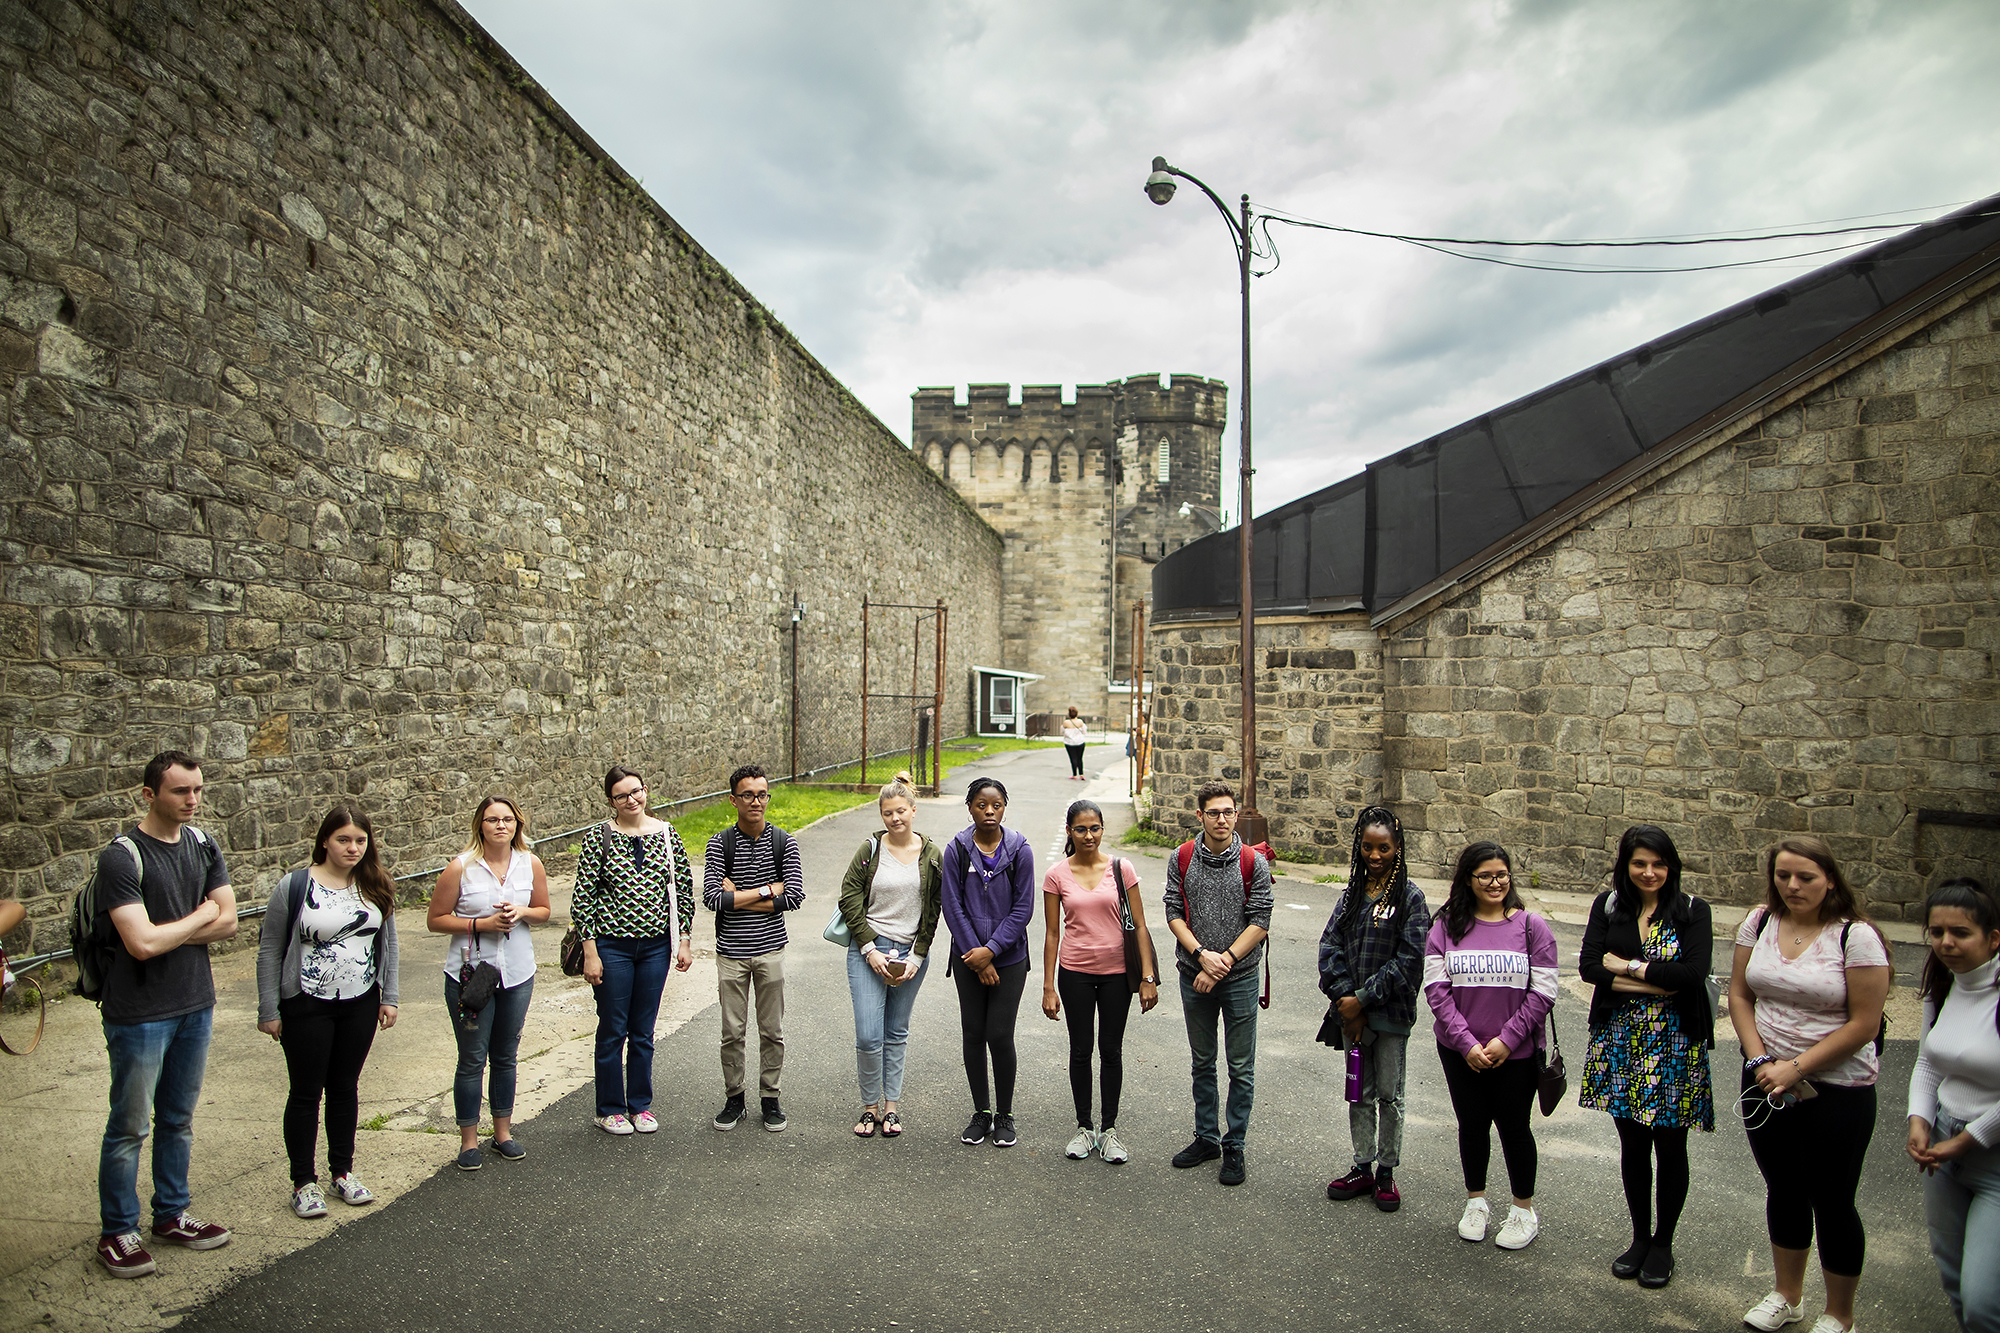 A two-week summer intensive workshop run by mindCORE focused on social and behavioral sciences, and on language science and technology, included a visit to Eastern State Penitentiary.